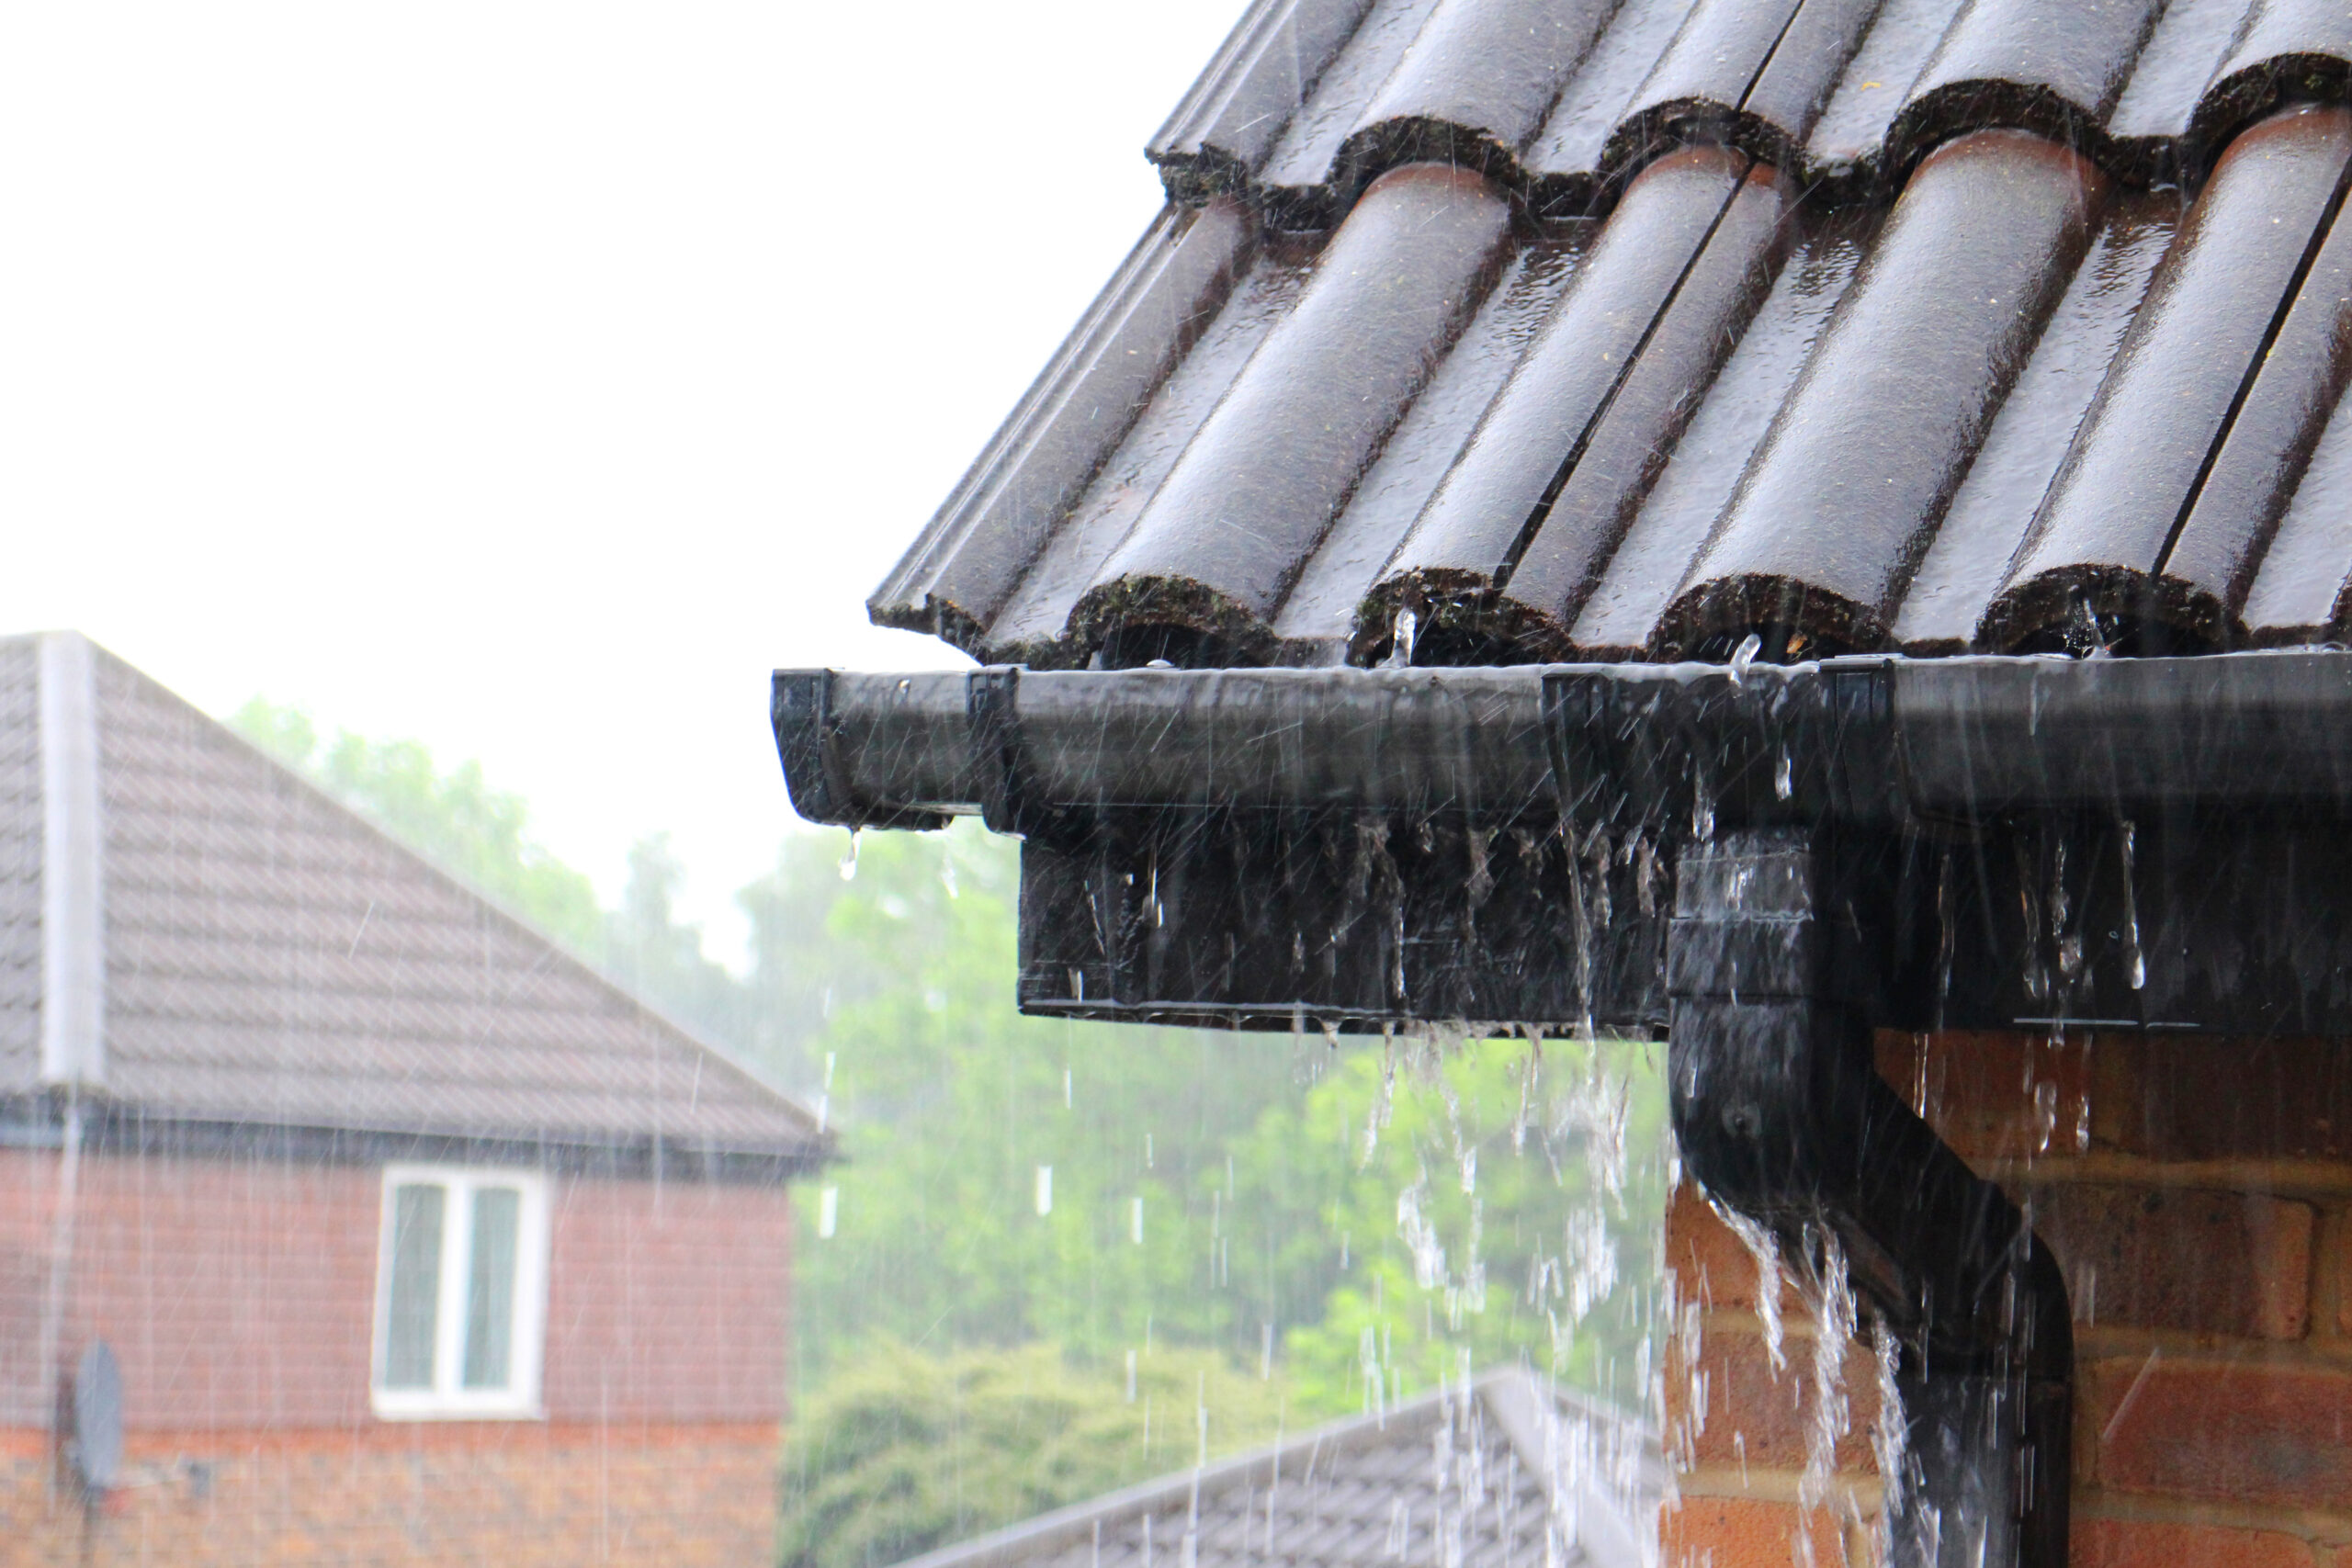 A close-up of a house's gutters during a rainy summer, with guttering in view.